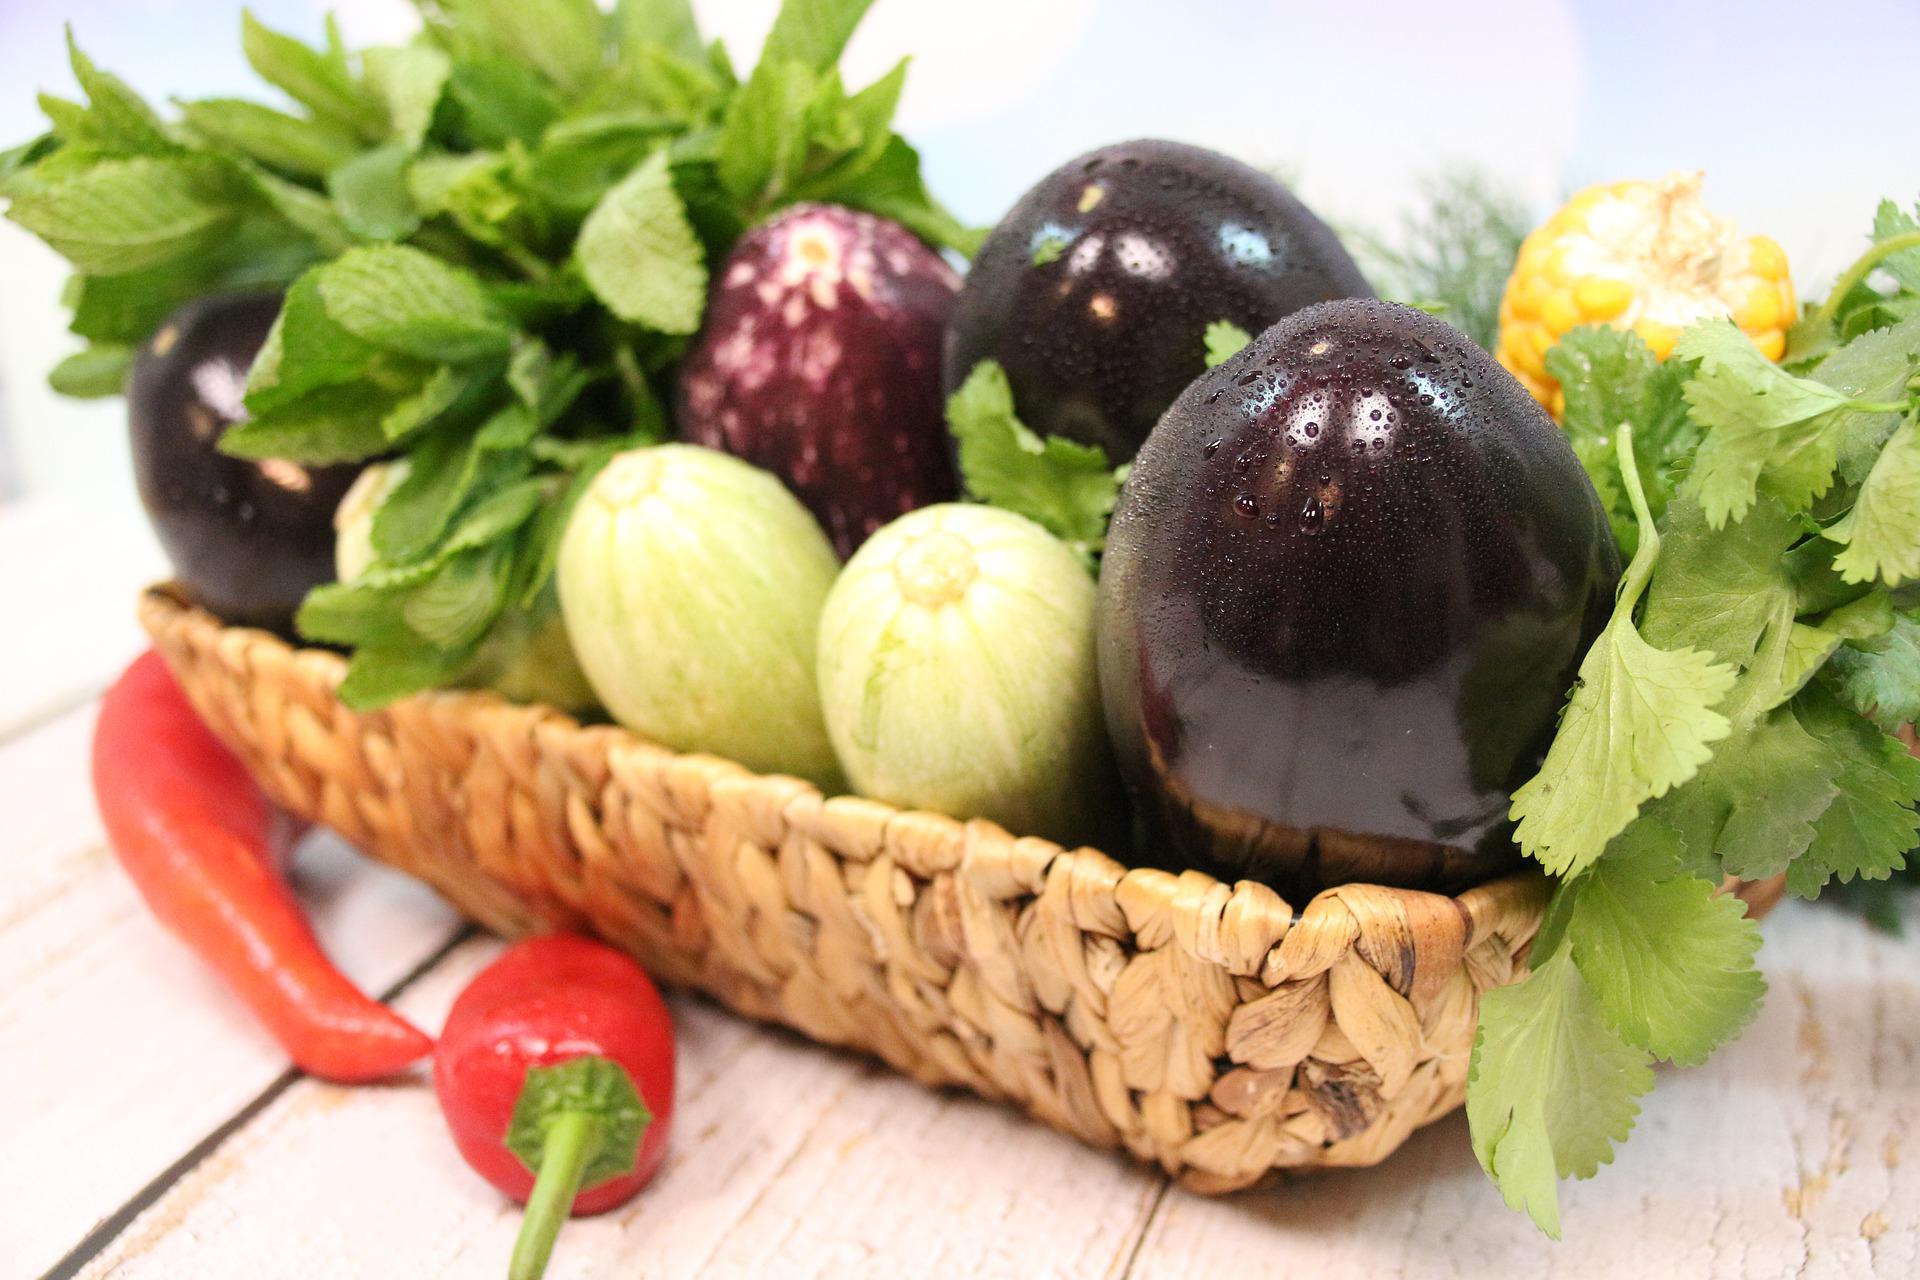 eggplant and veggies in a basket